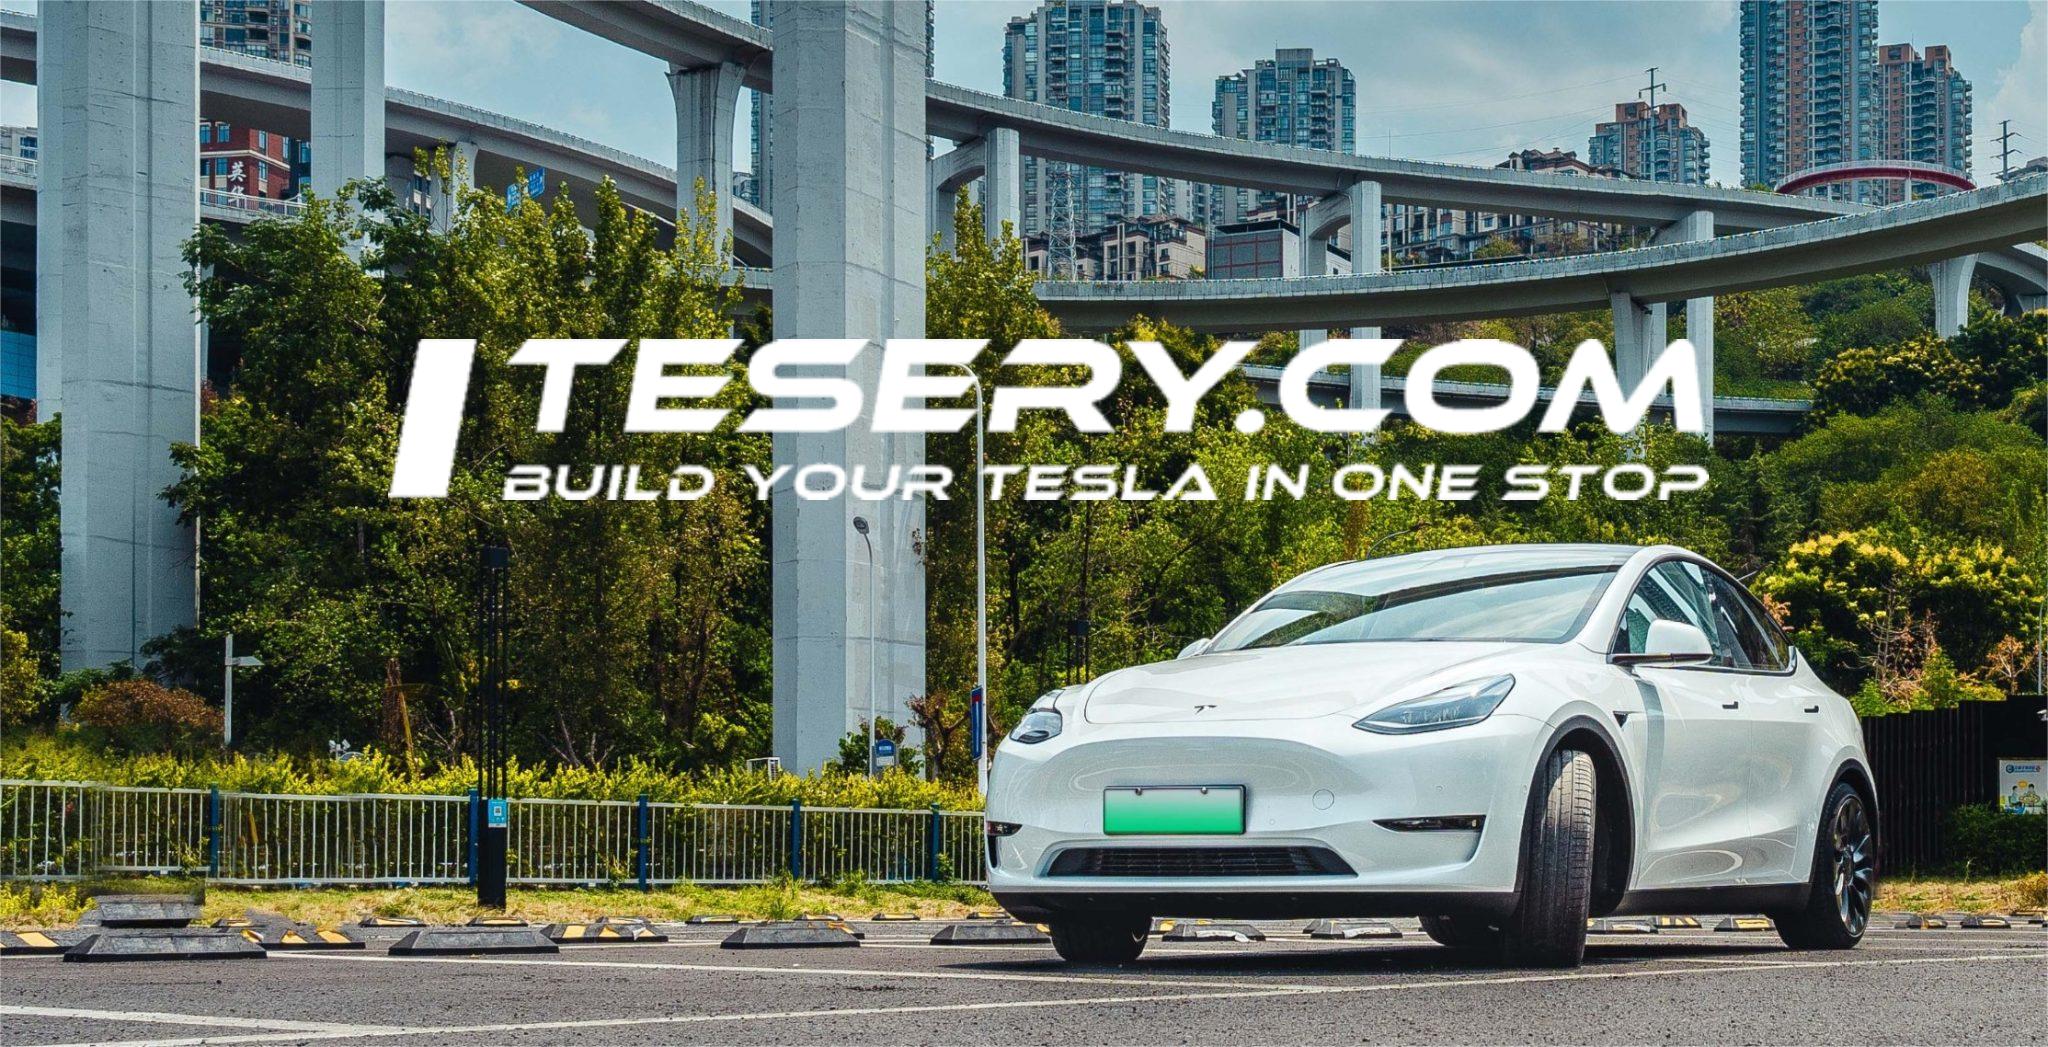 Tesla's Shanghai Customers Get Special Incentives: Shopping Vouchers and More - Tesery Official Store